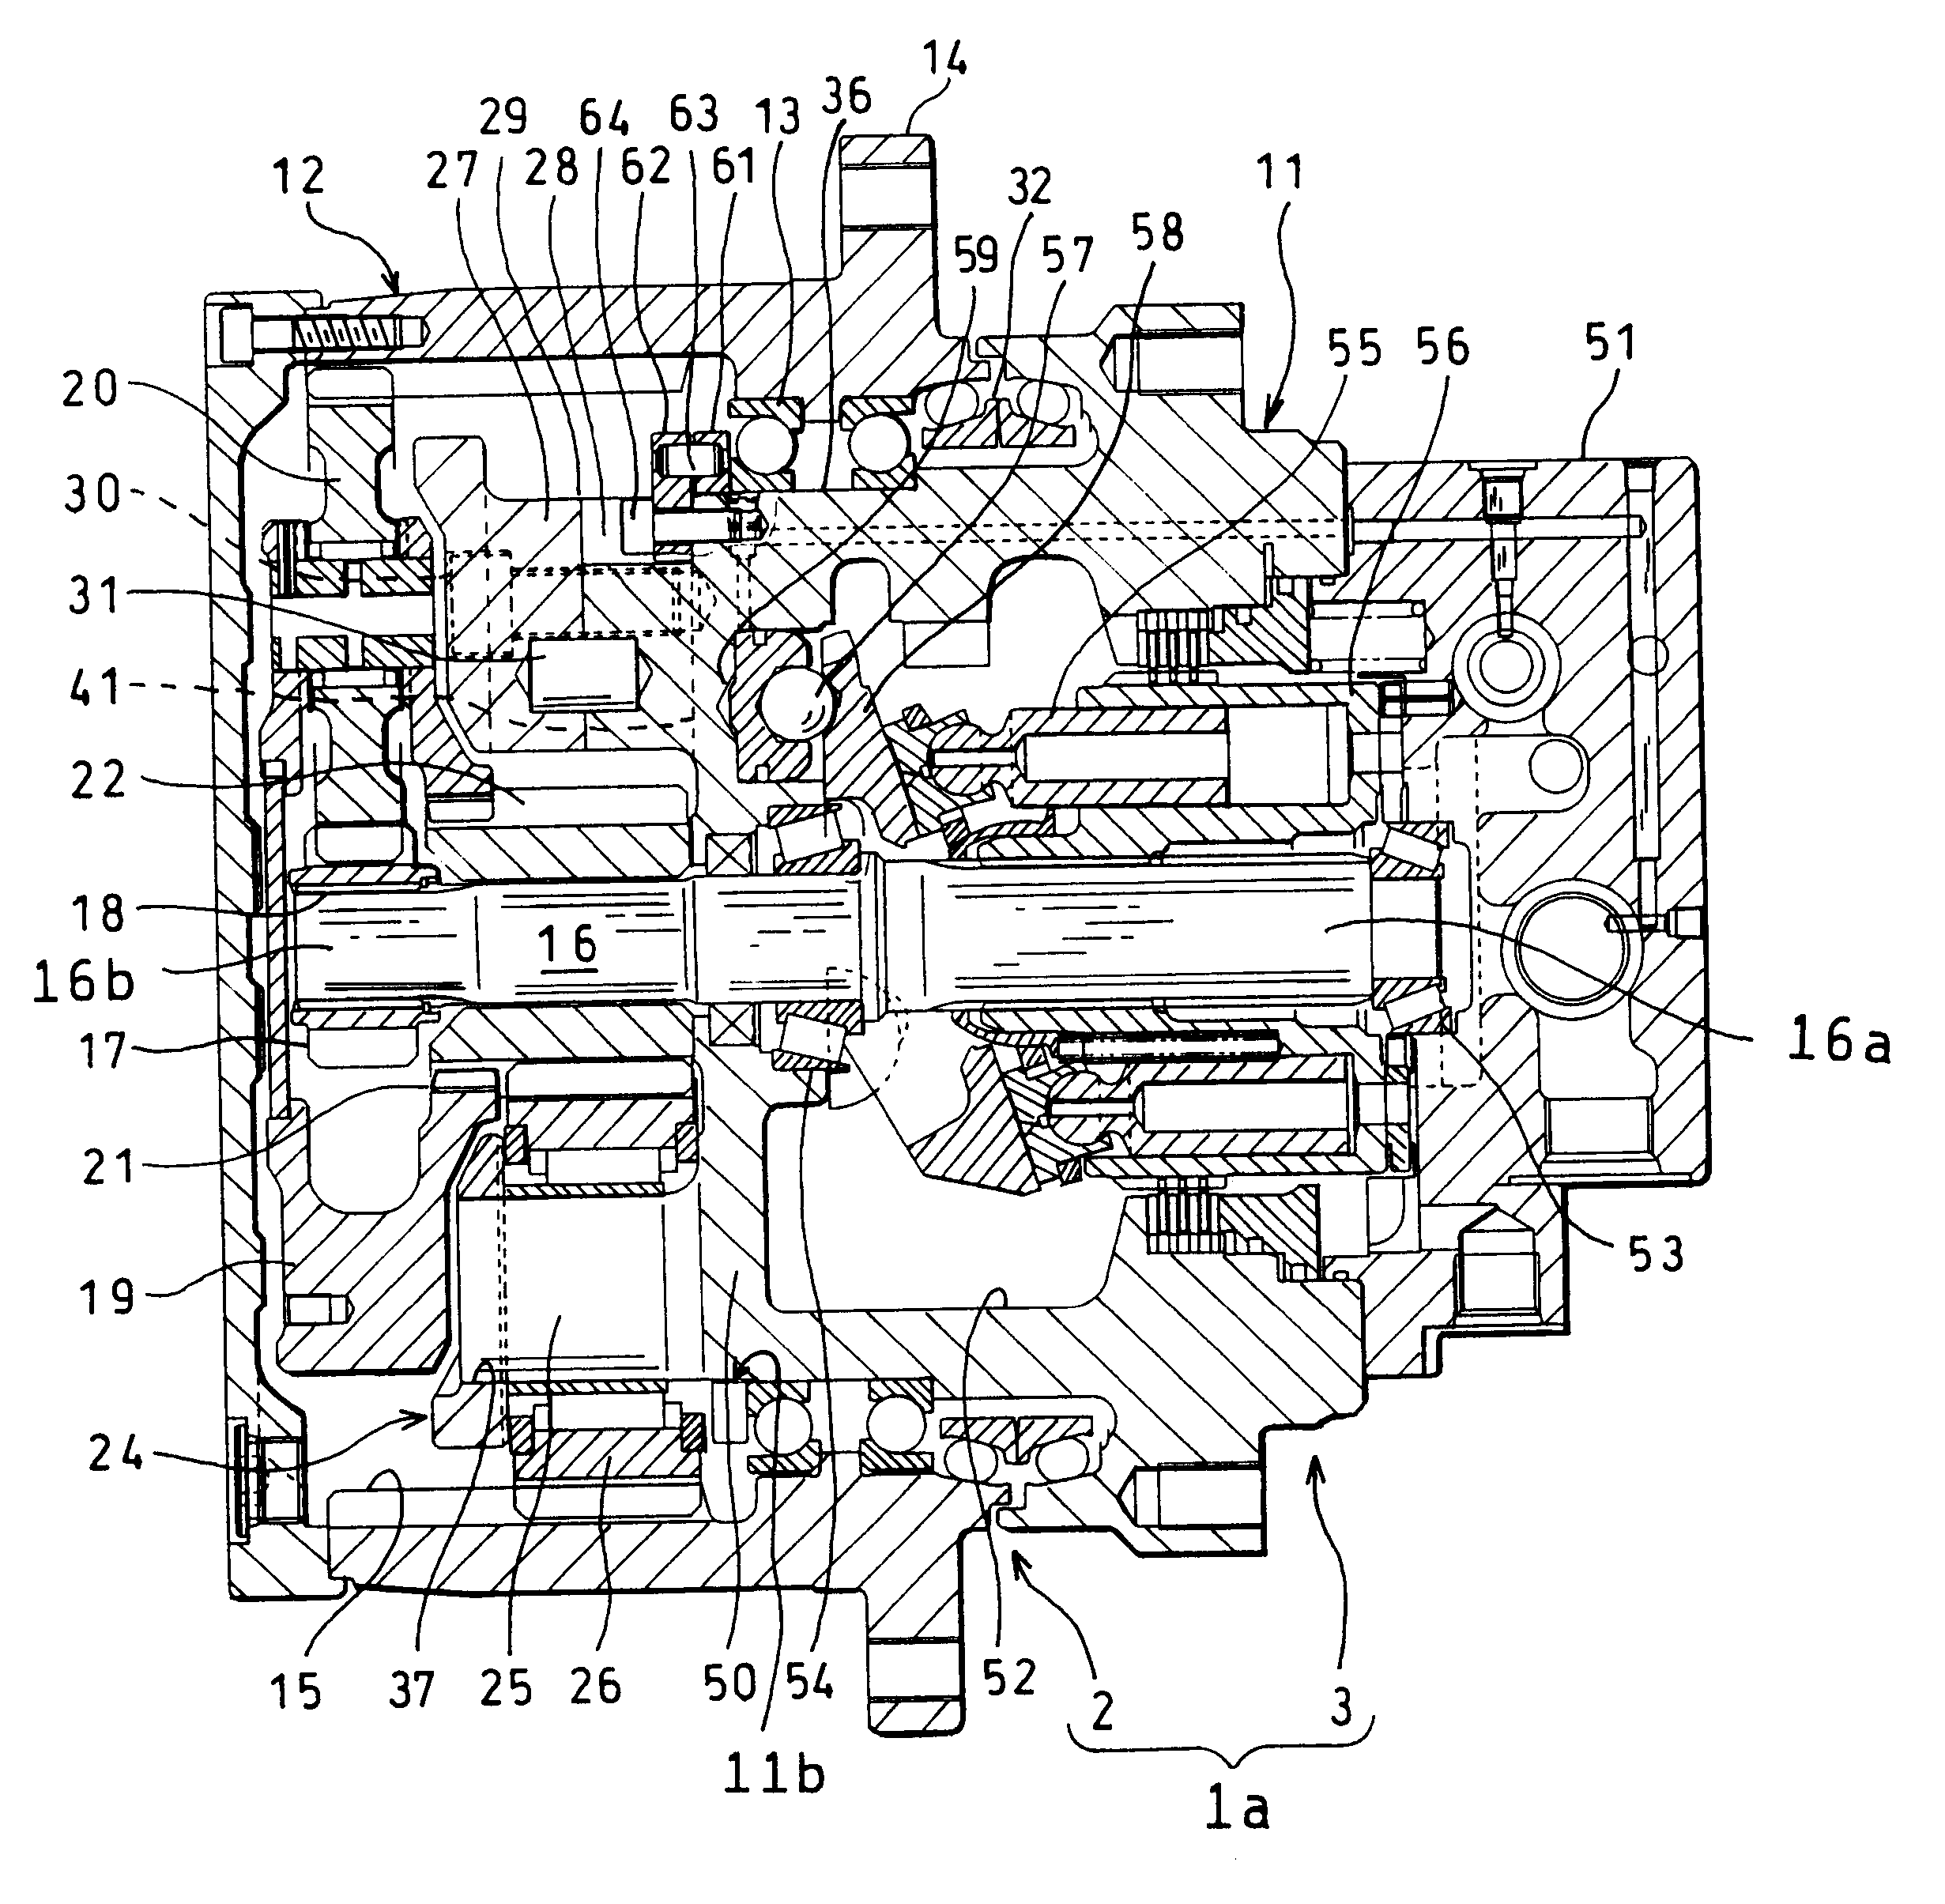 Driving unit that comprises a hydraulic motor and a reduction gear